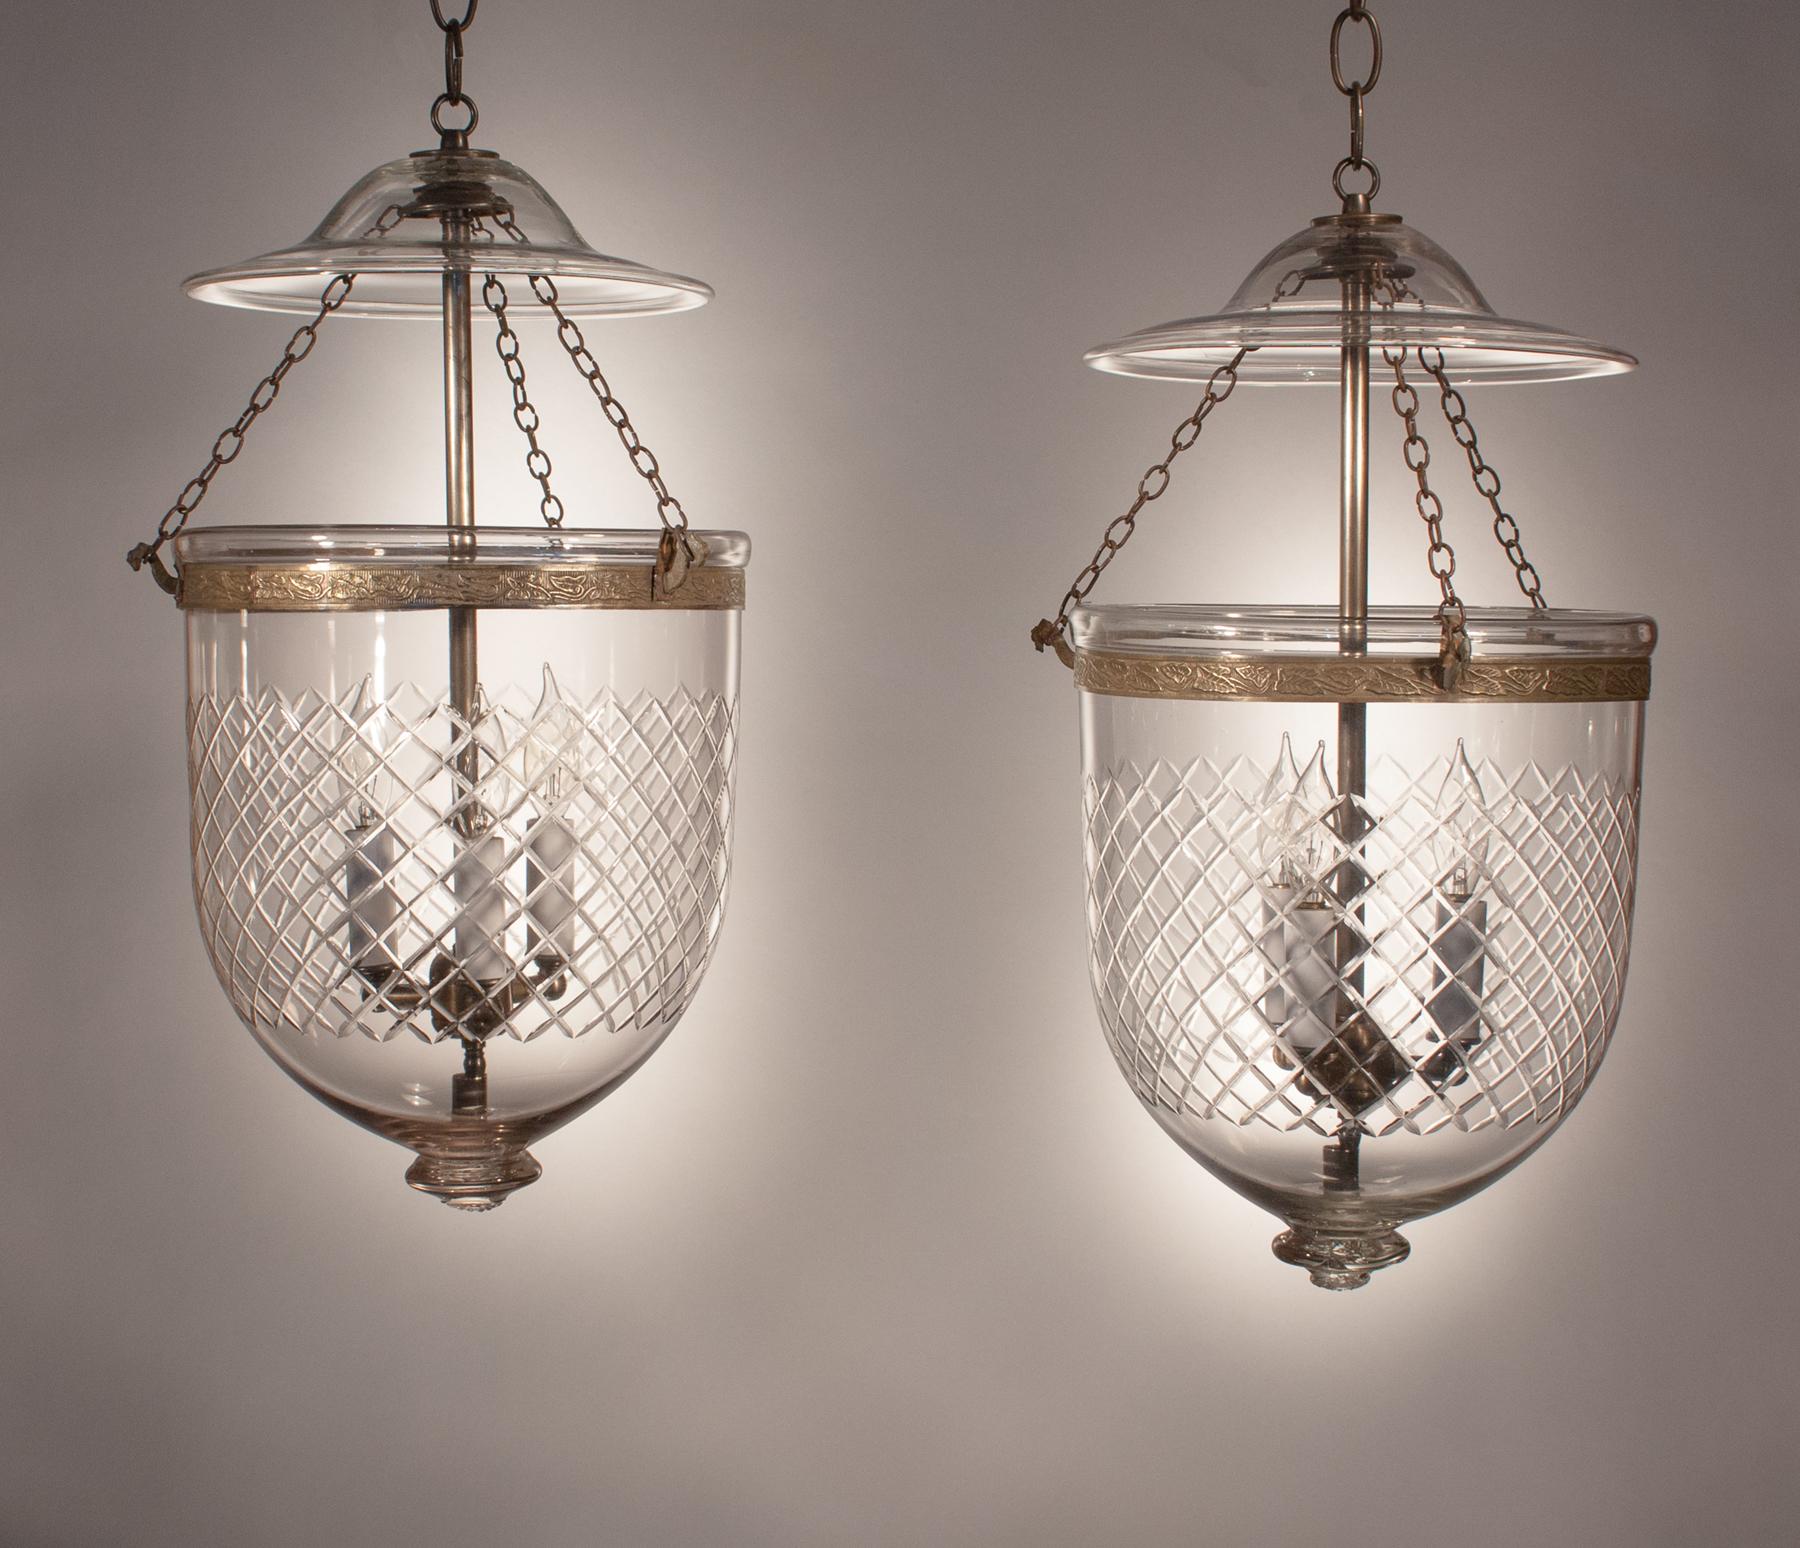 It is rare to find a pair of authentic bell jar lanterns with such great quality handblown glass that are also this well matched. These circa 1875 medium-sized lanterns are cut with a Waterford-like diamond motif and feature period smoke bells and